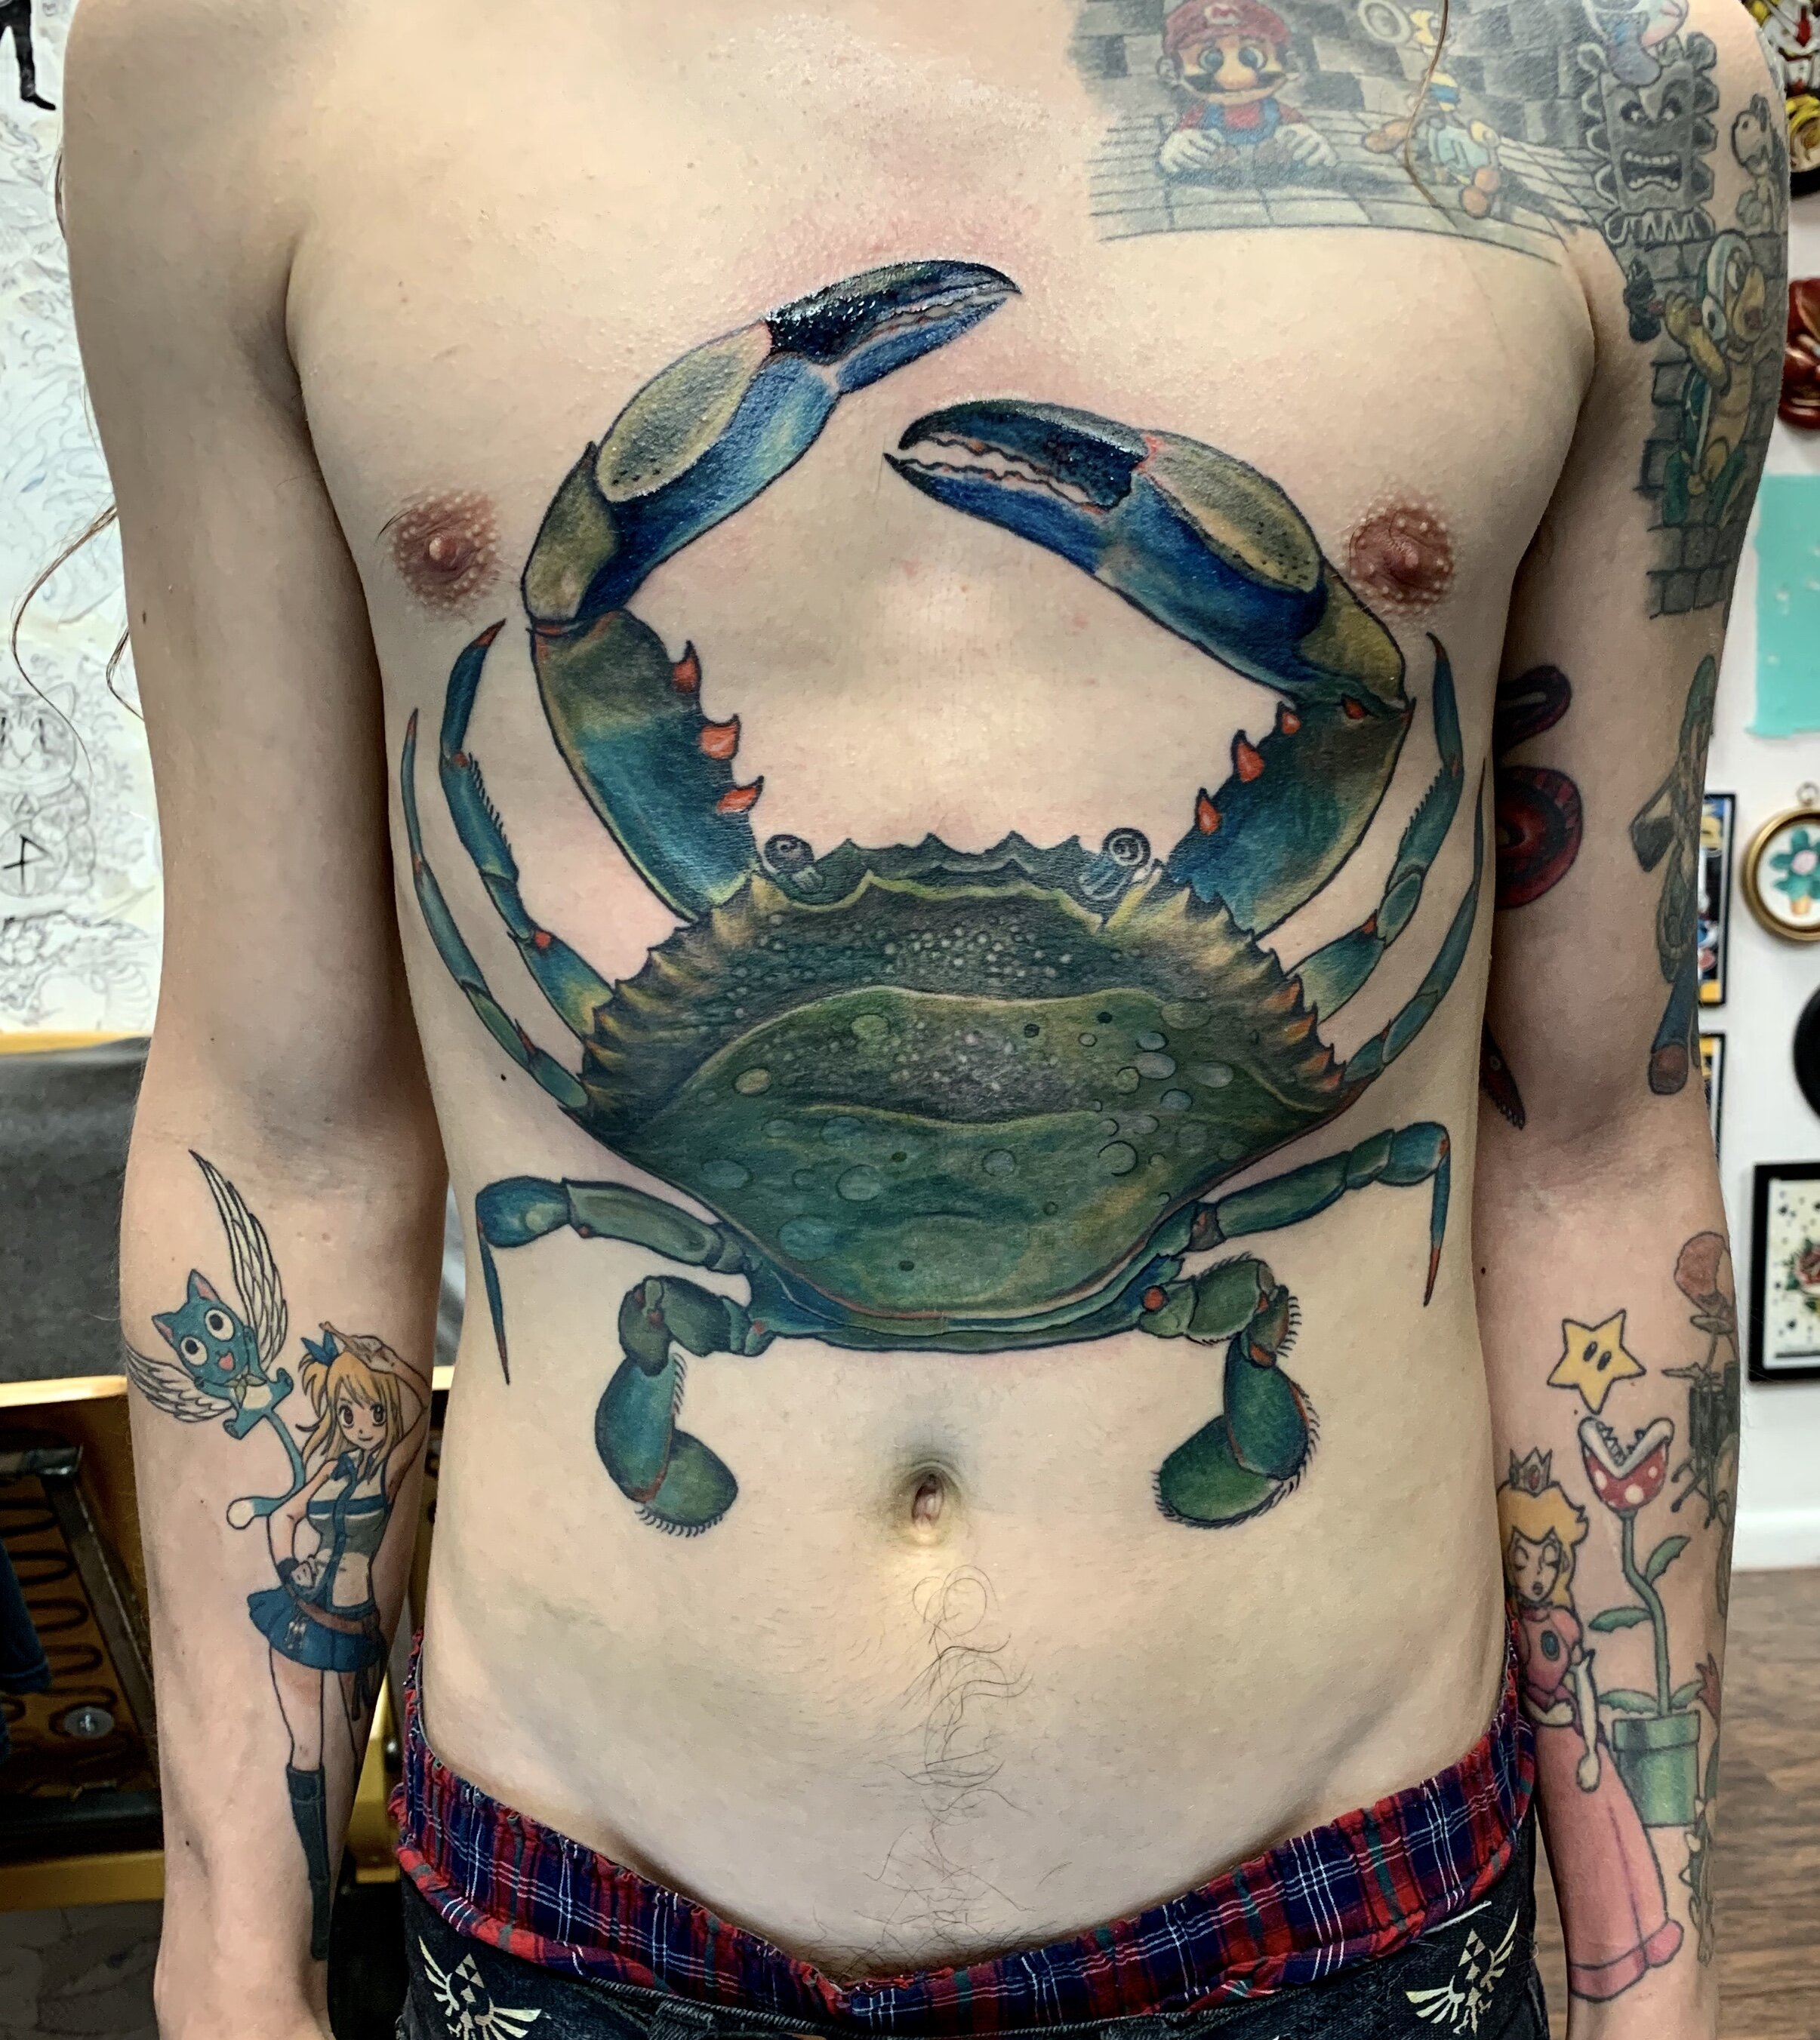 𝐊𝐄𝐕 𝐓𝐀𝐓𝐓𝐎𝐎𝐒 on Instagram Heikegani tattoo Heikegani is a  species of crab native to Japan that has a shell that resembles a face  Sometimes called a samurai crab